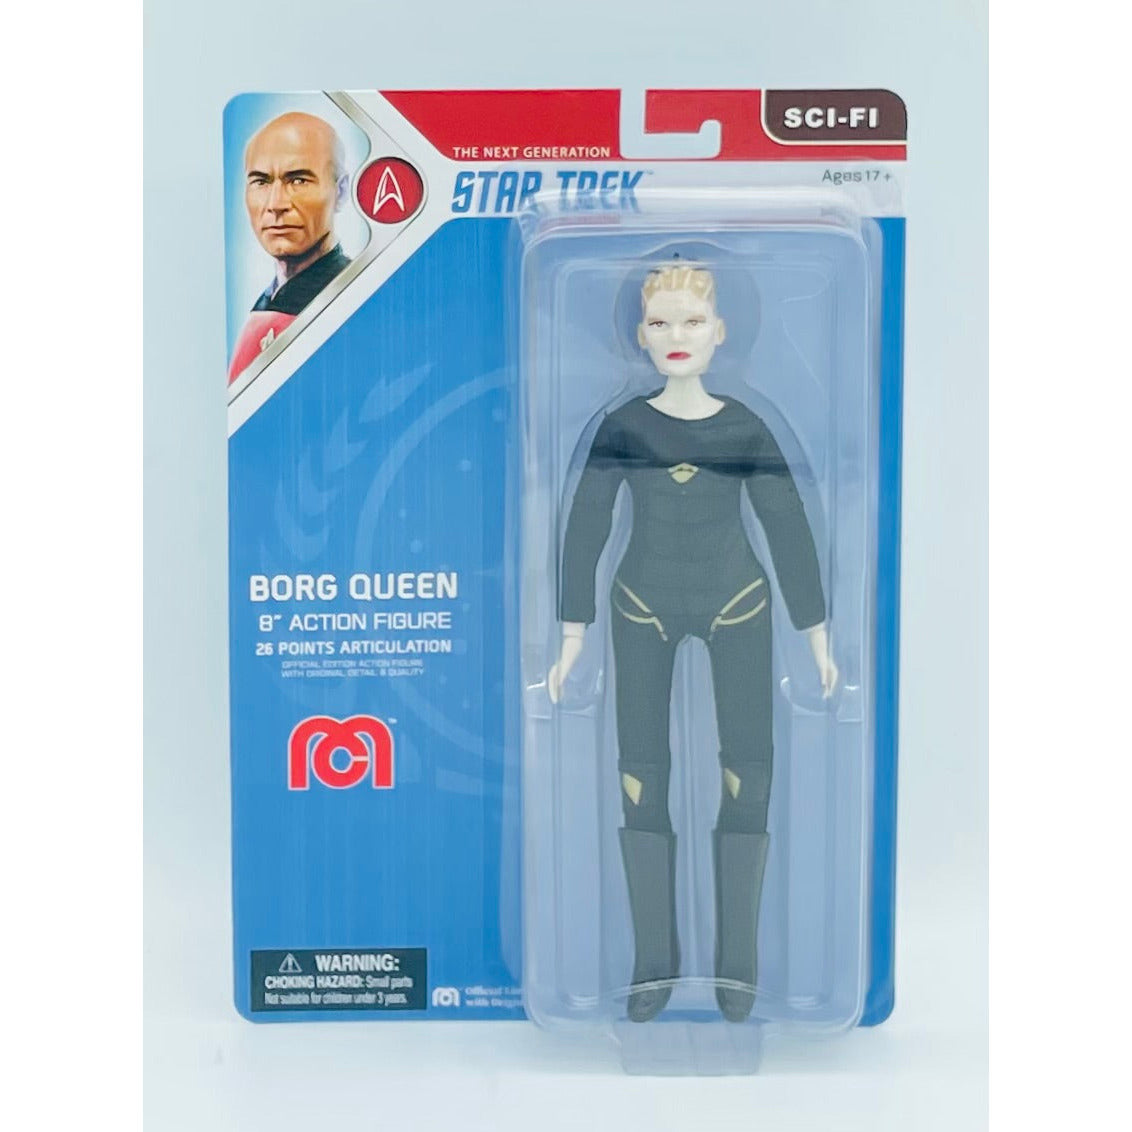 Topps x Mego Star Trek The Next Generation Borg Queen Limited Edition Figure